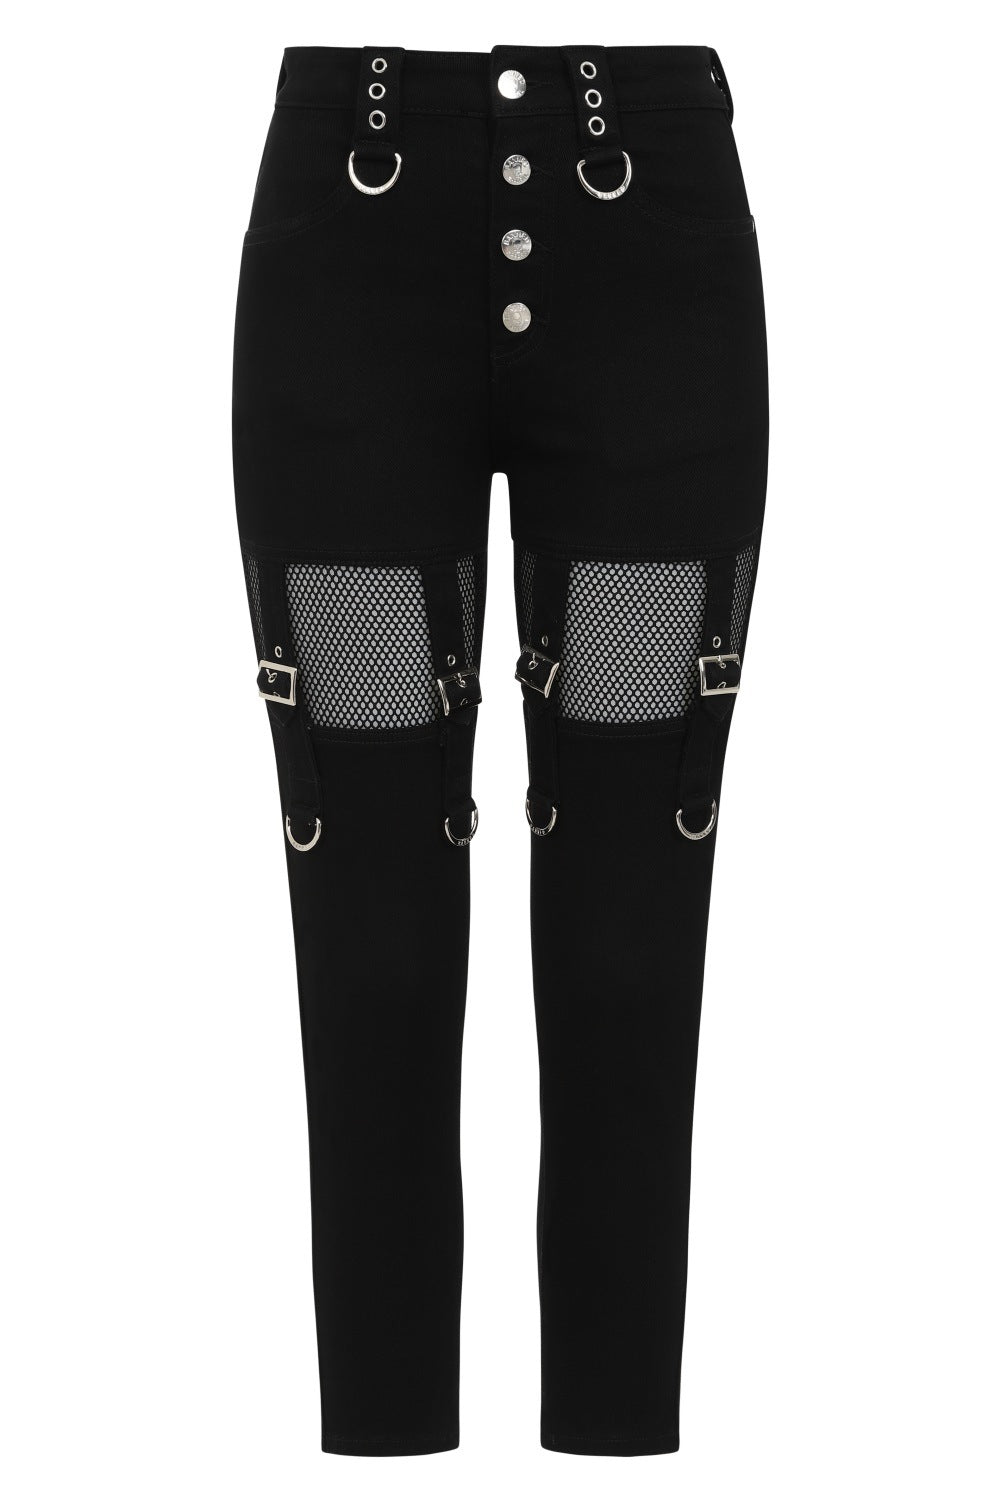 Mid rise black trousers with black mesh cut outs on the thighs and strap details 